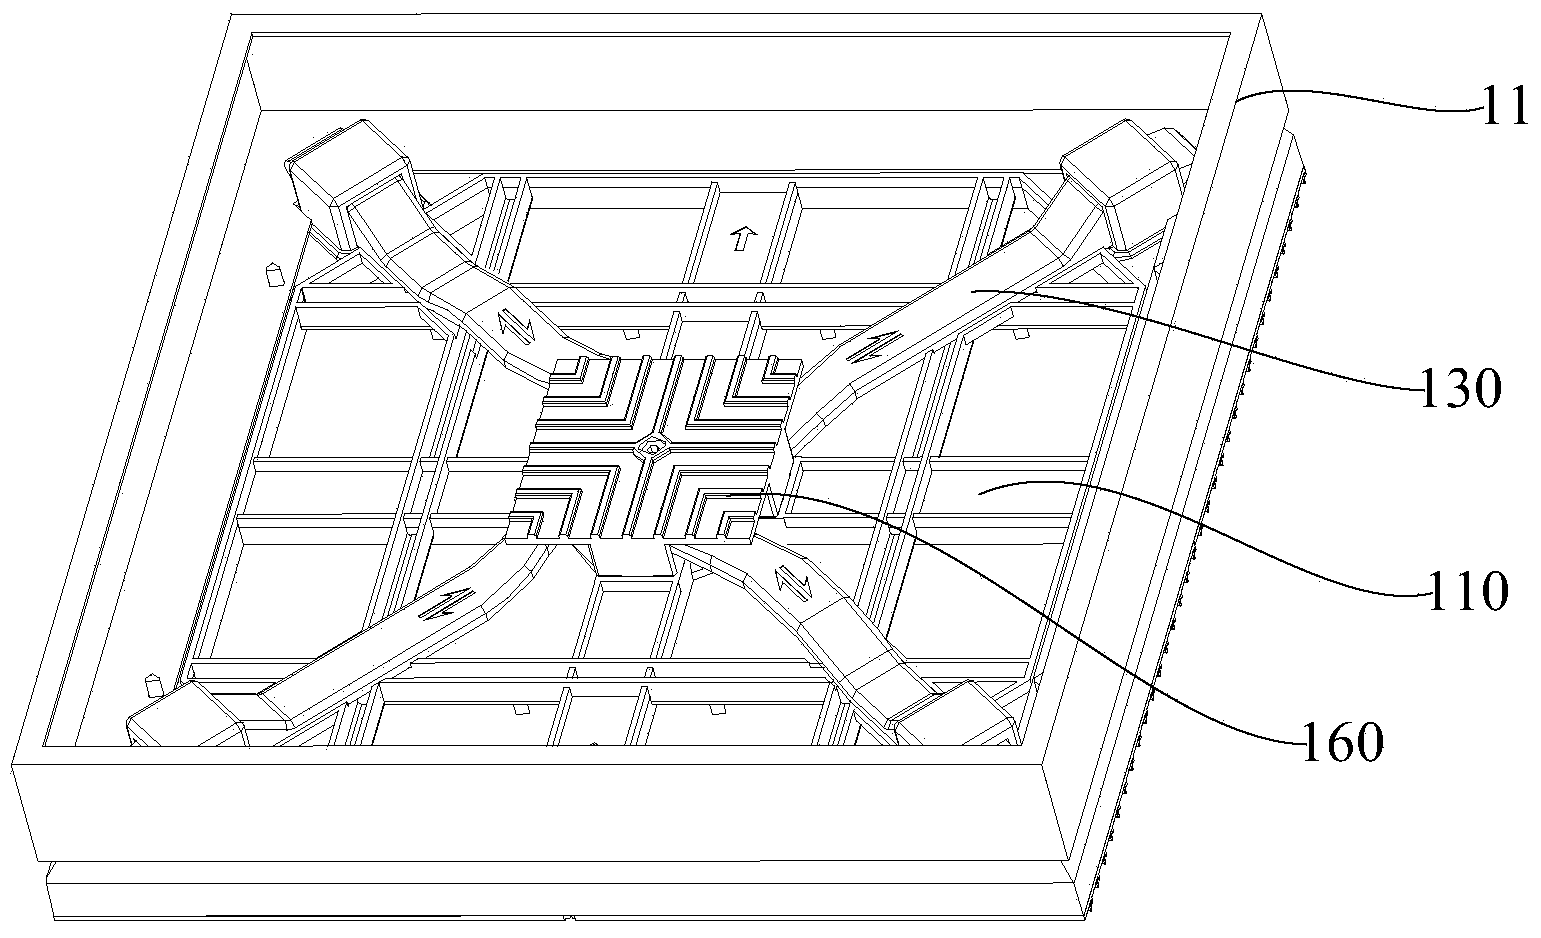 Installation module and LED (Light Emitting Diode) display component comprising installation module